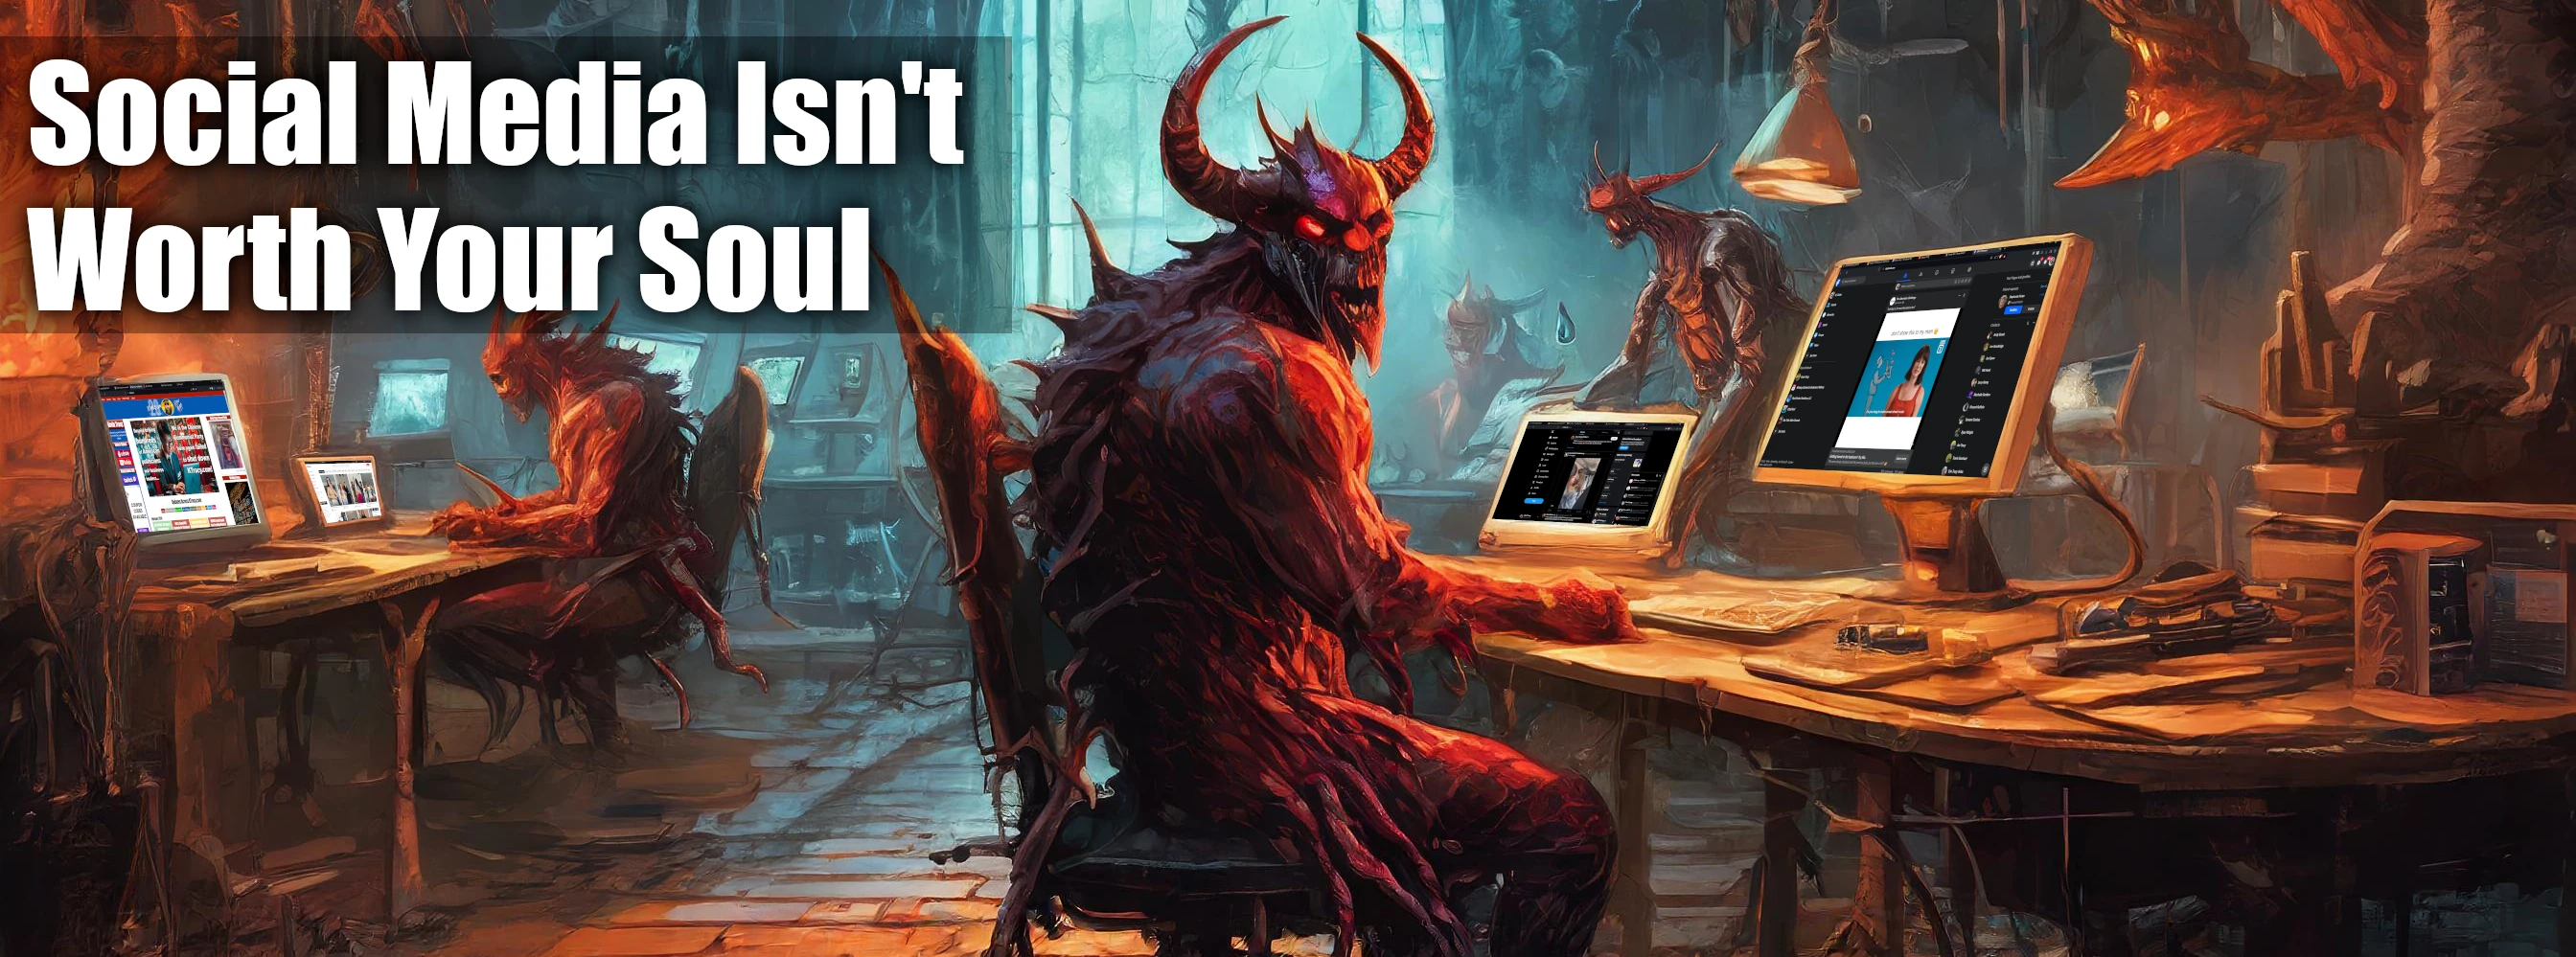 Art of demons using social media with the caption: Social Media Isn't Worth Your Soul.